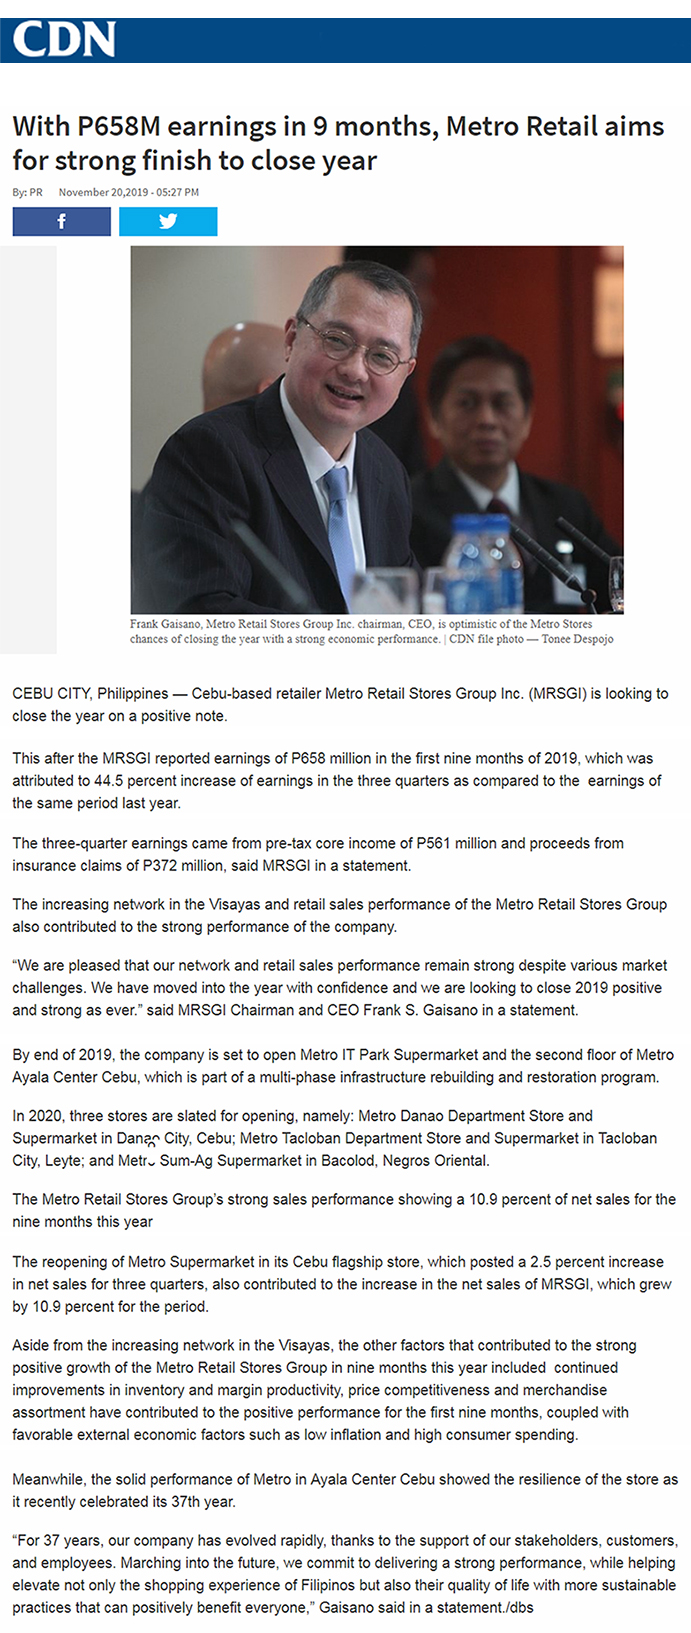 November 20 2019 With P658M earnings in 9 months Metro Retail aims for strong finish to close year Philippine Daily Inquirerwww.inquirer.net